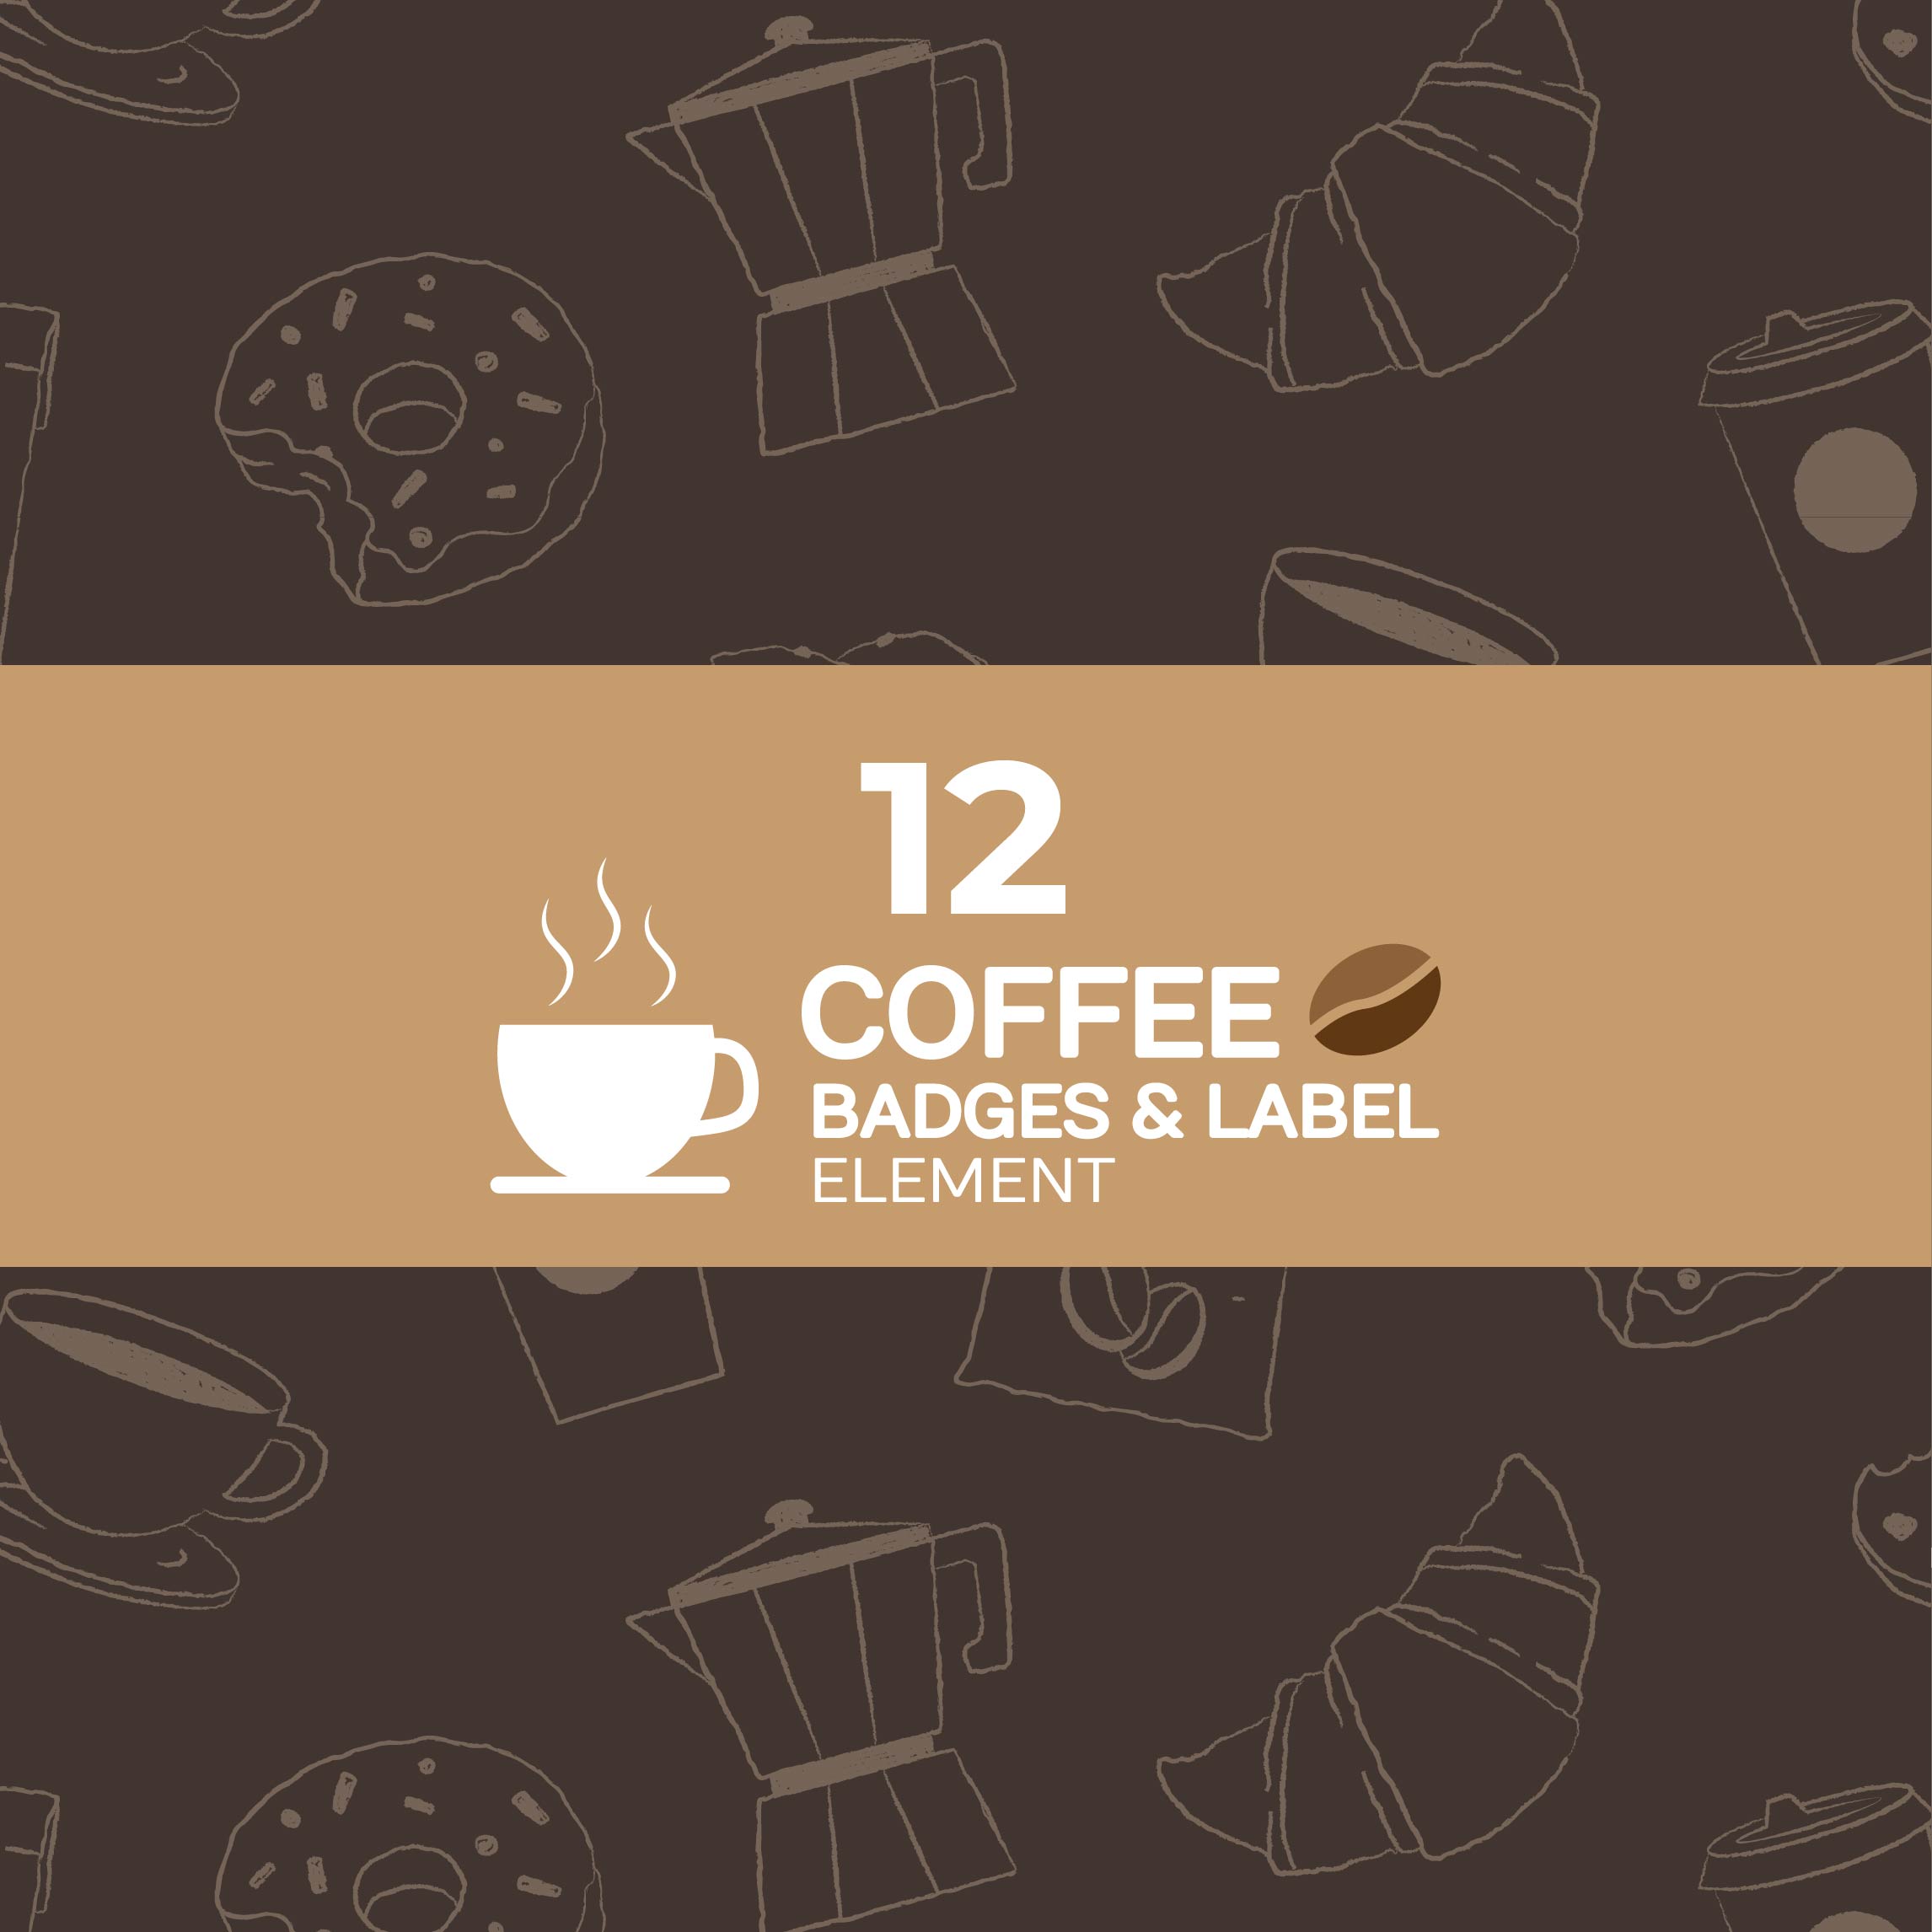 12 Coffee Badges & Lables cover image.